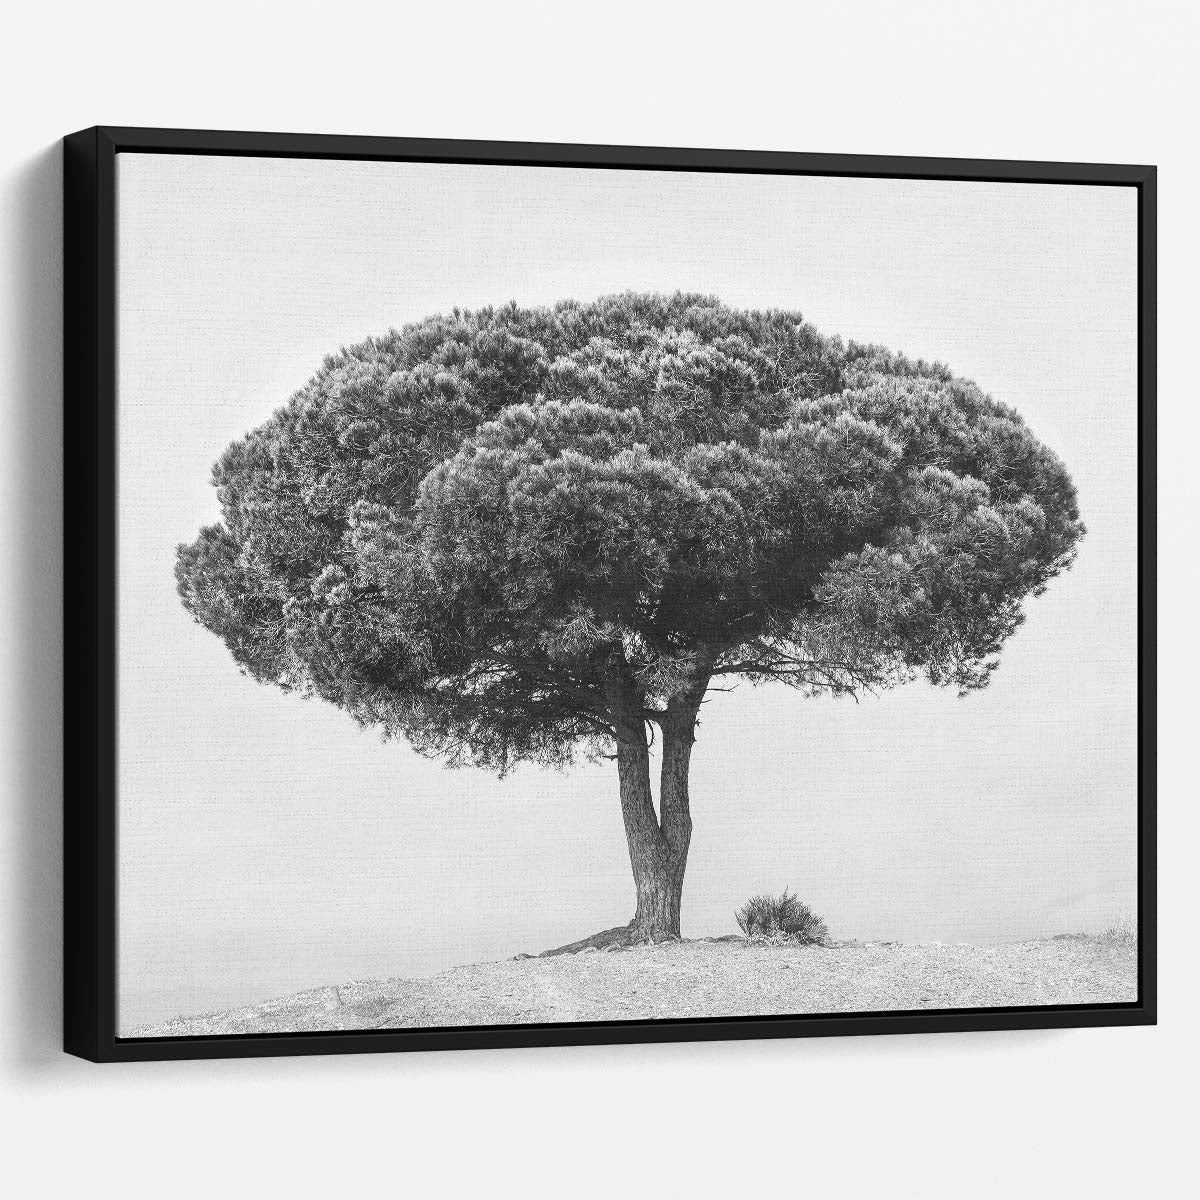 Serene Andalucian Pine Landscape Monochrome Wall Art by Luxuriance Designs. Made in USA.